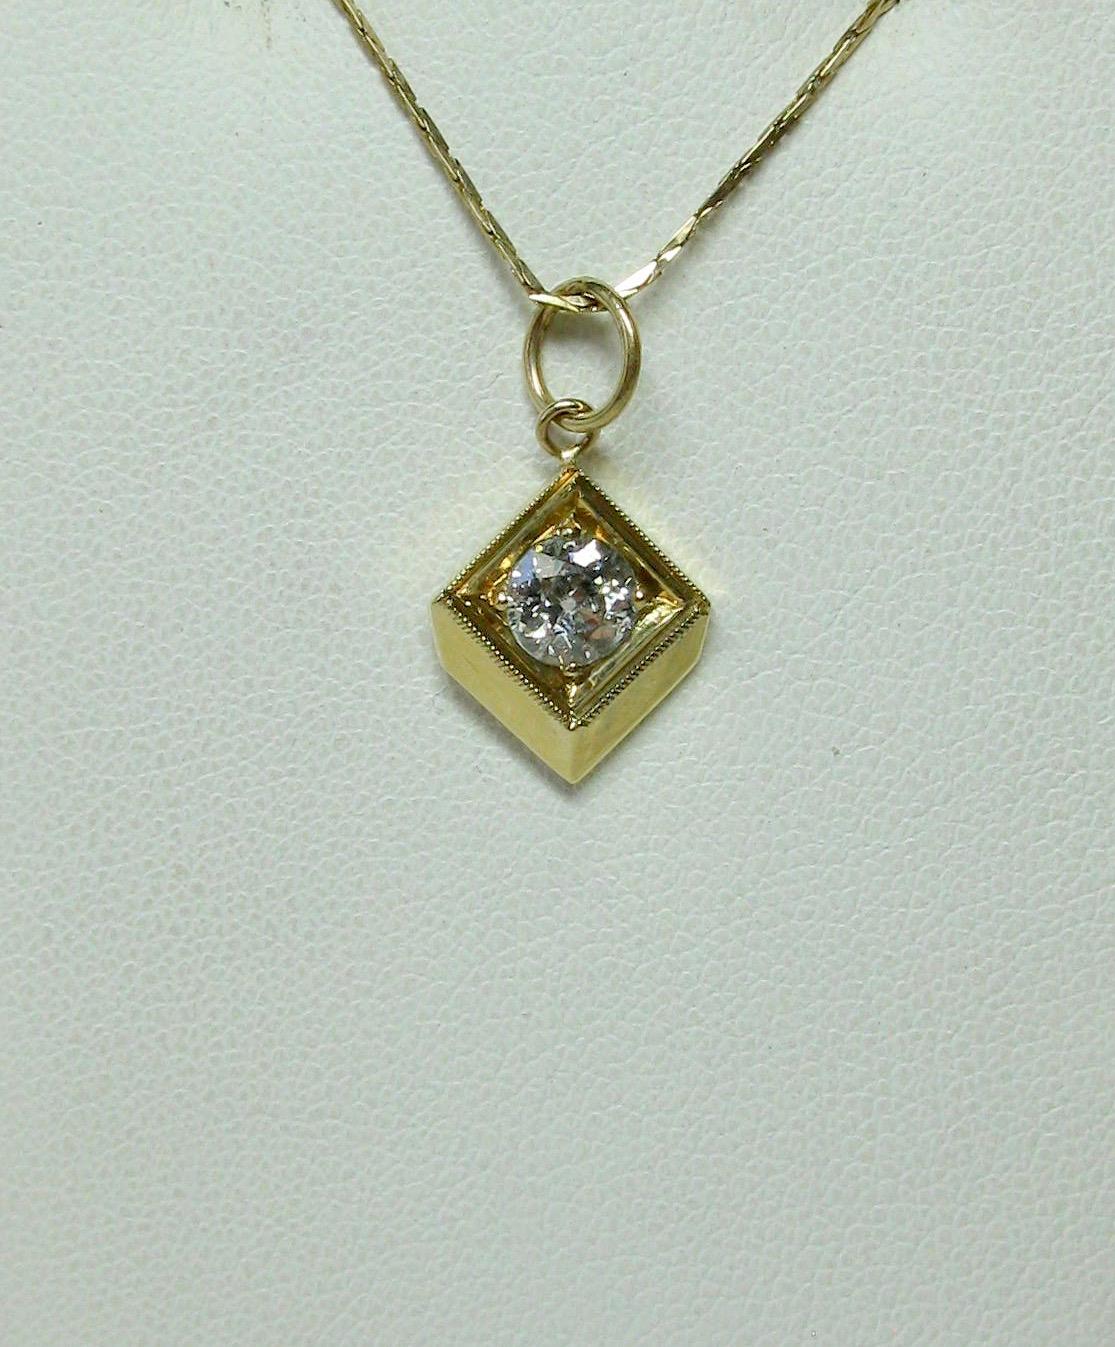 A stunning Antique Victorian Pendant with a gorgeous Old European Cut Diamond of 1/2 Carat.  The sparkling white antique diamond is I color - very white!  It is set in a beautiful beaded milgrain architectural border in lovely 14 Karat Yellow Gold. 